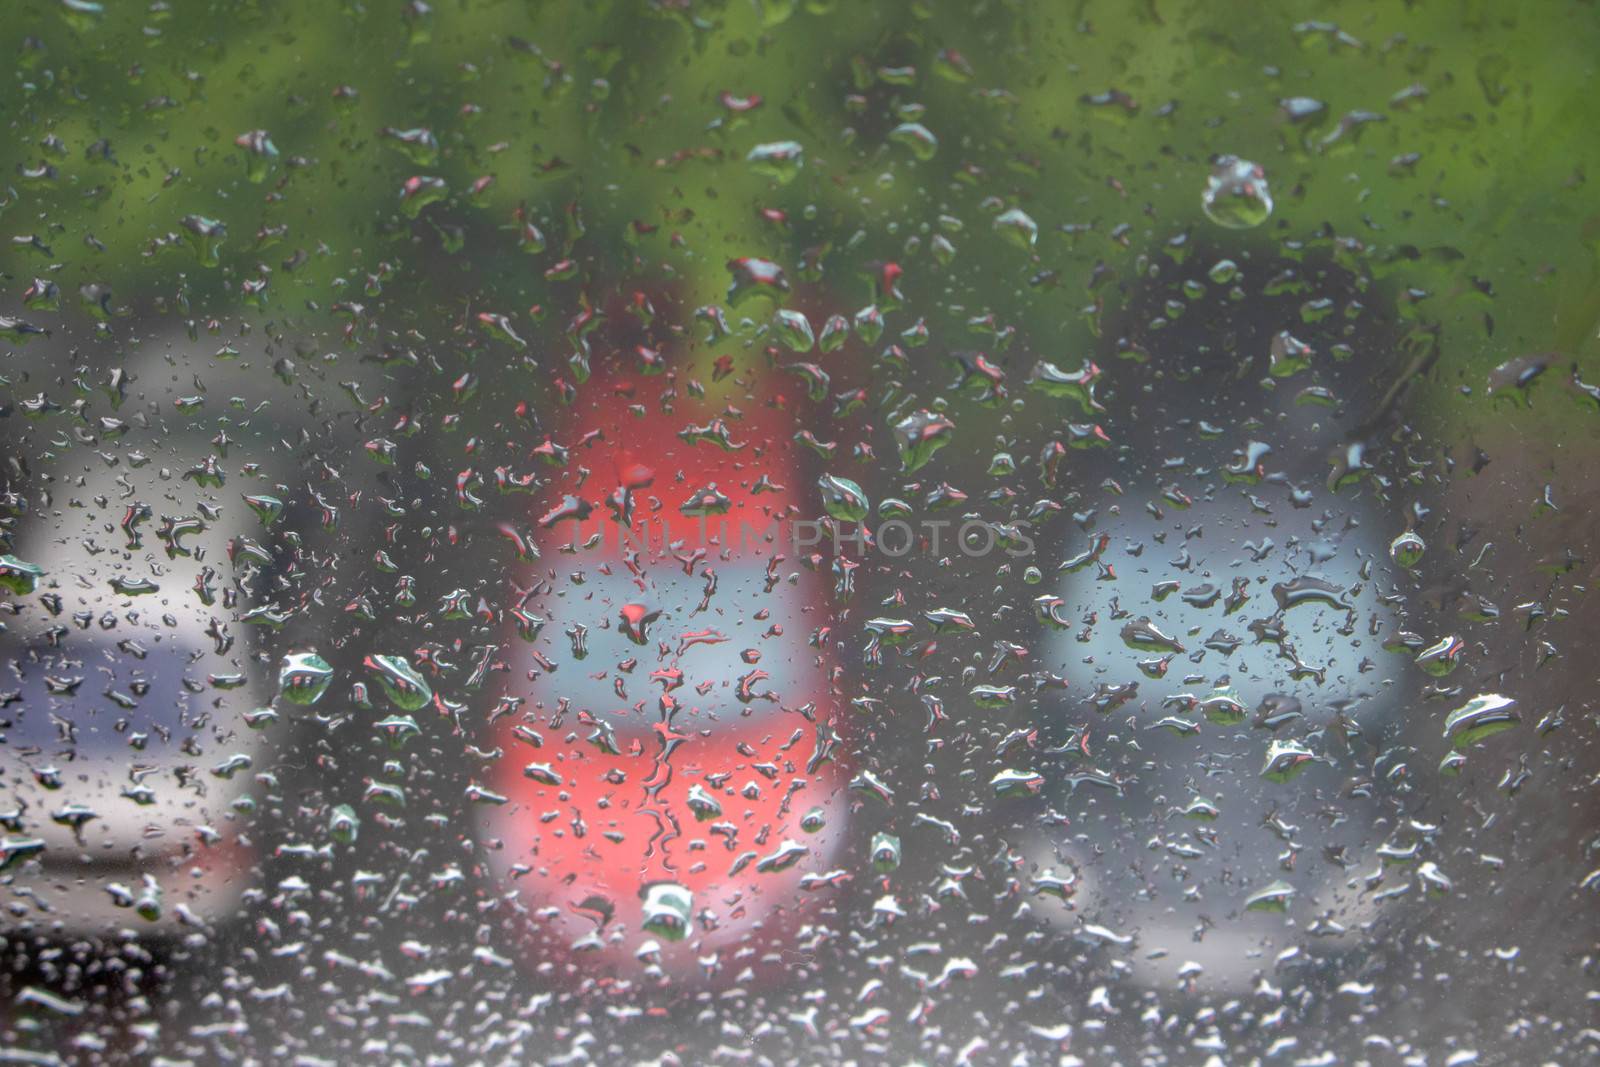 Raindrops on the window, with cars in the Parking lot in the background by lapushka62